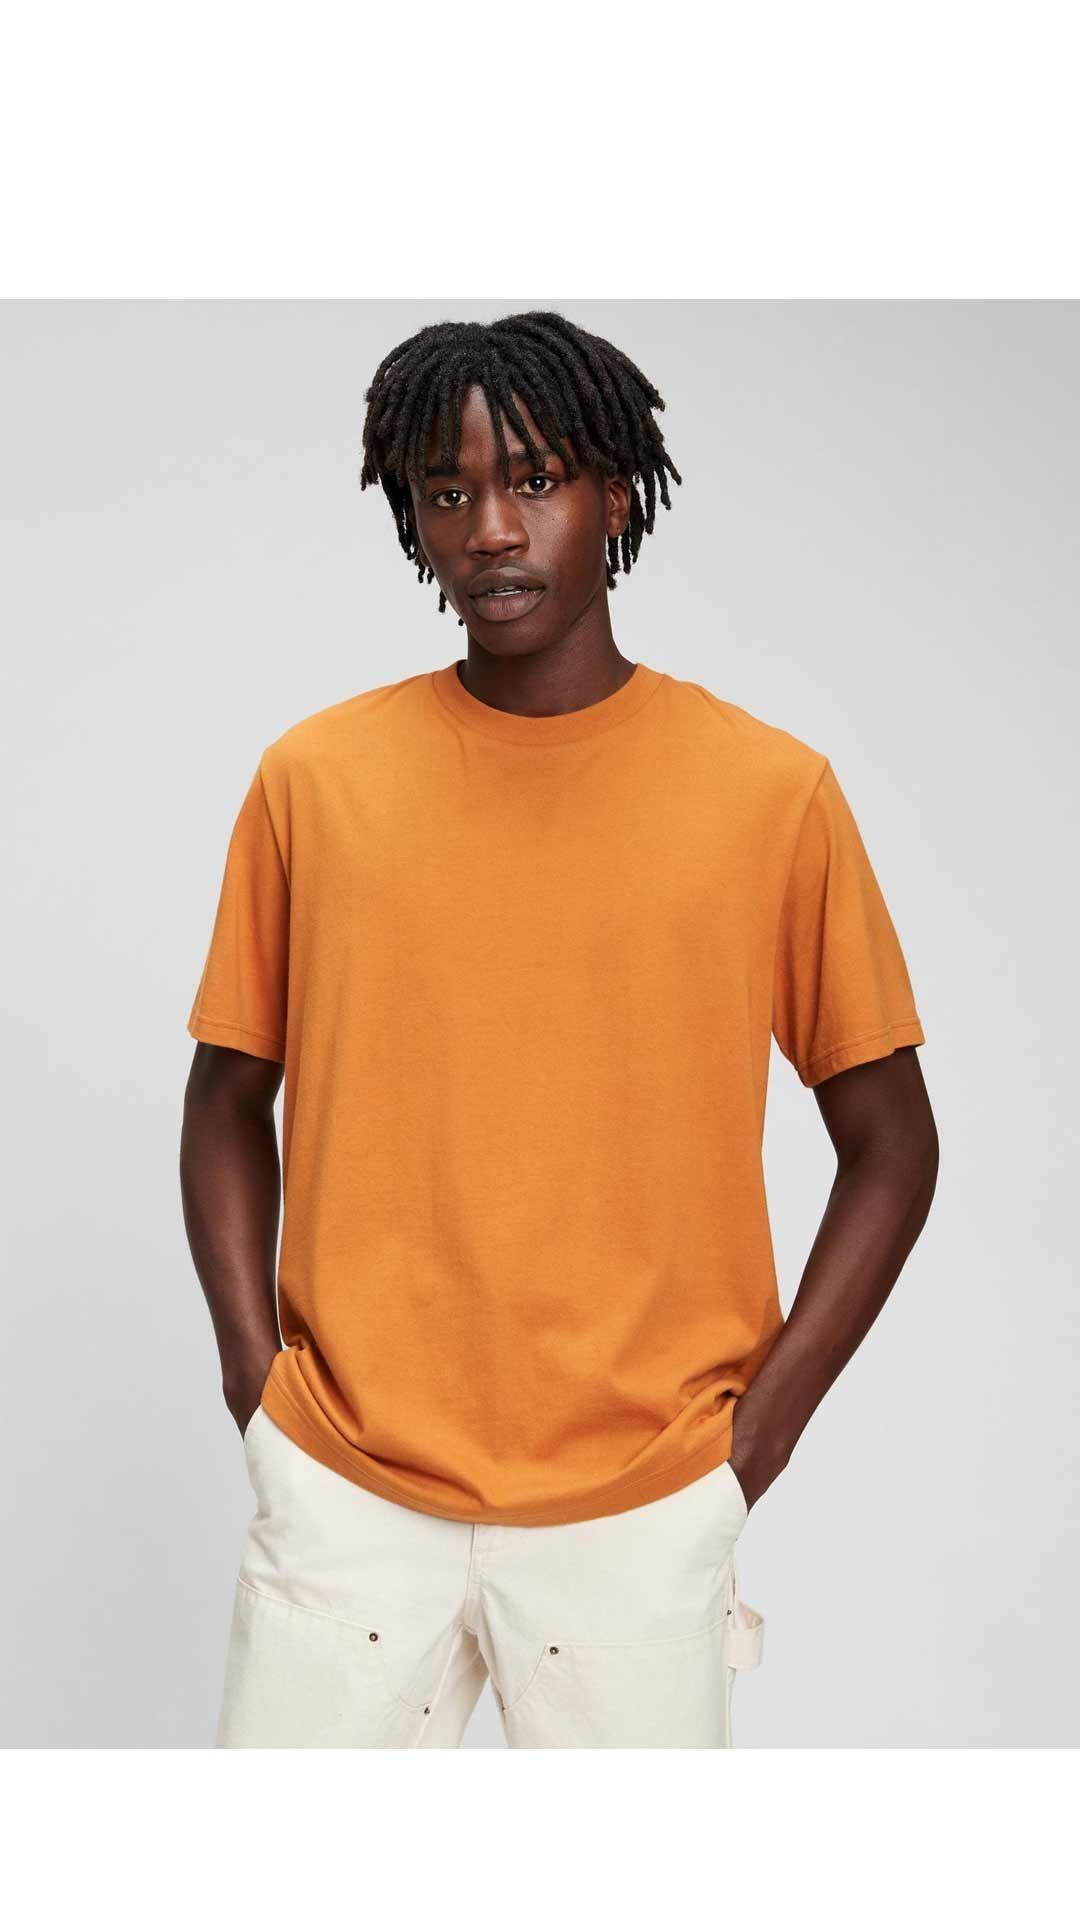 Gap launches its online store in Spain and Arrives loaded with autumnal trends for men 